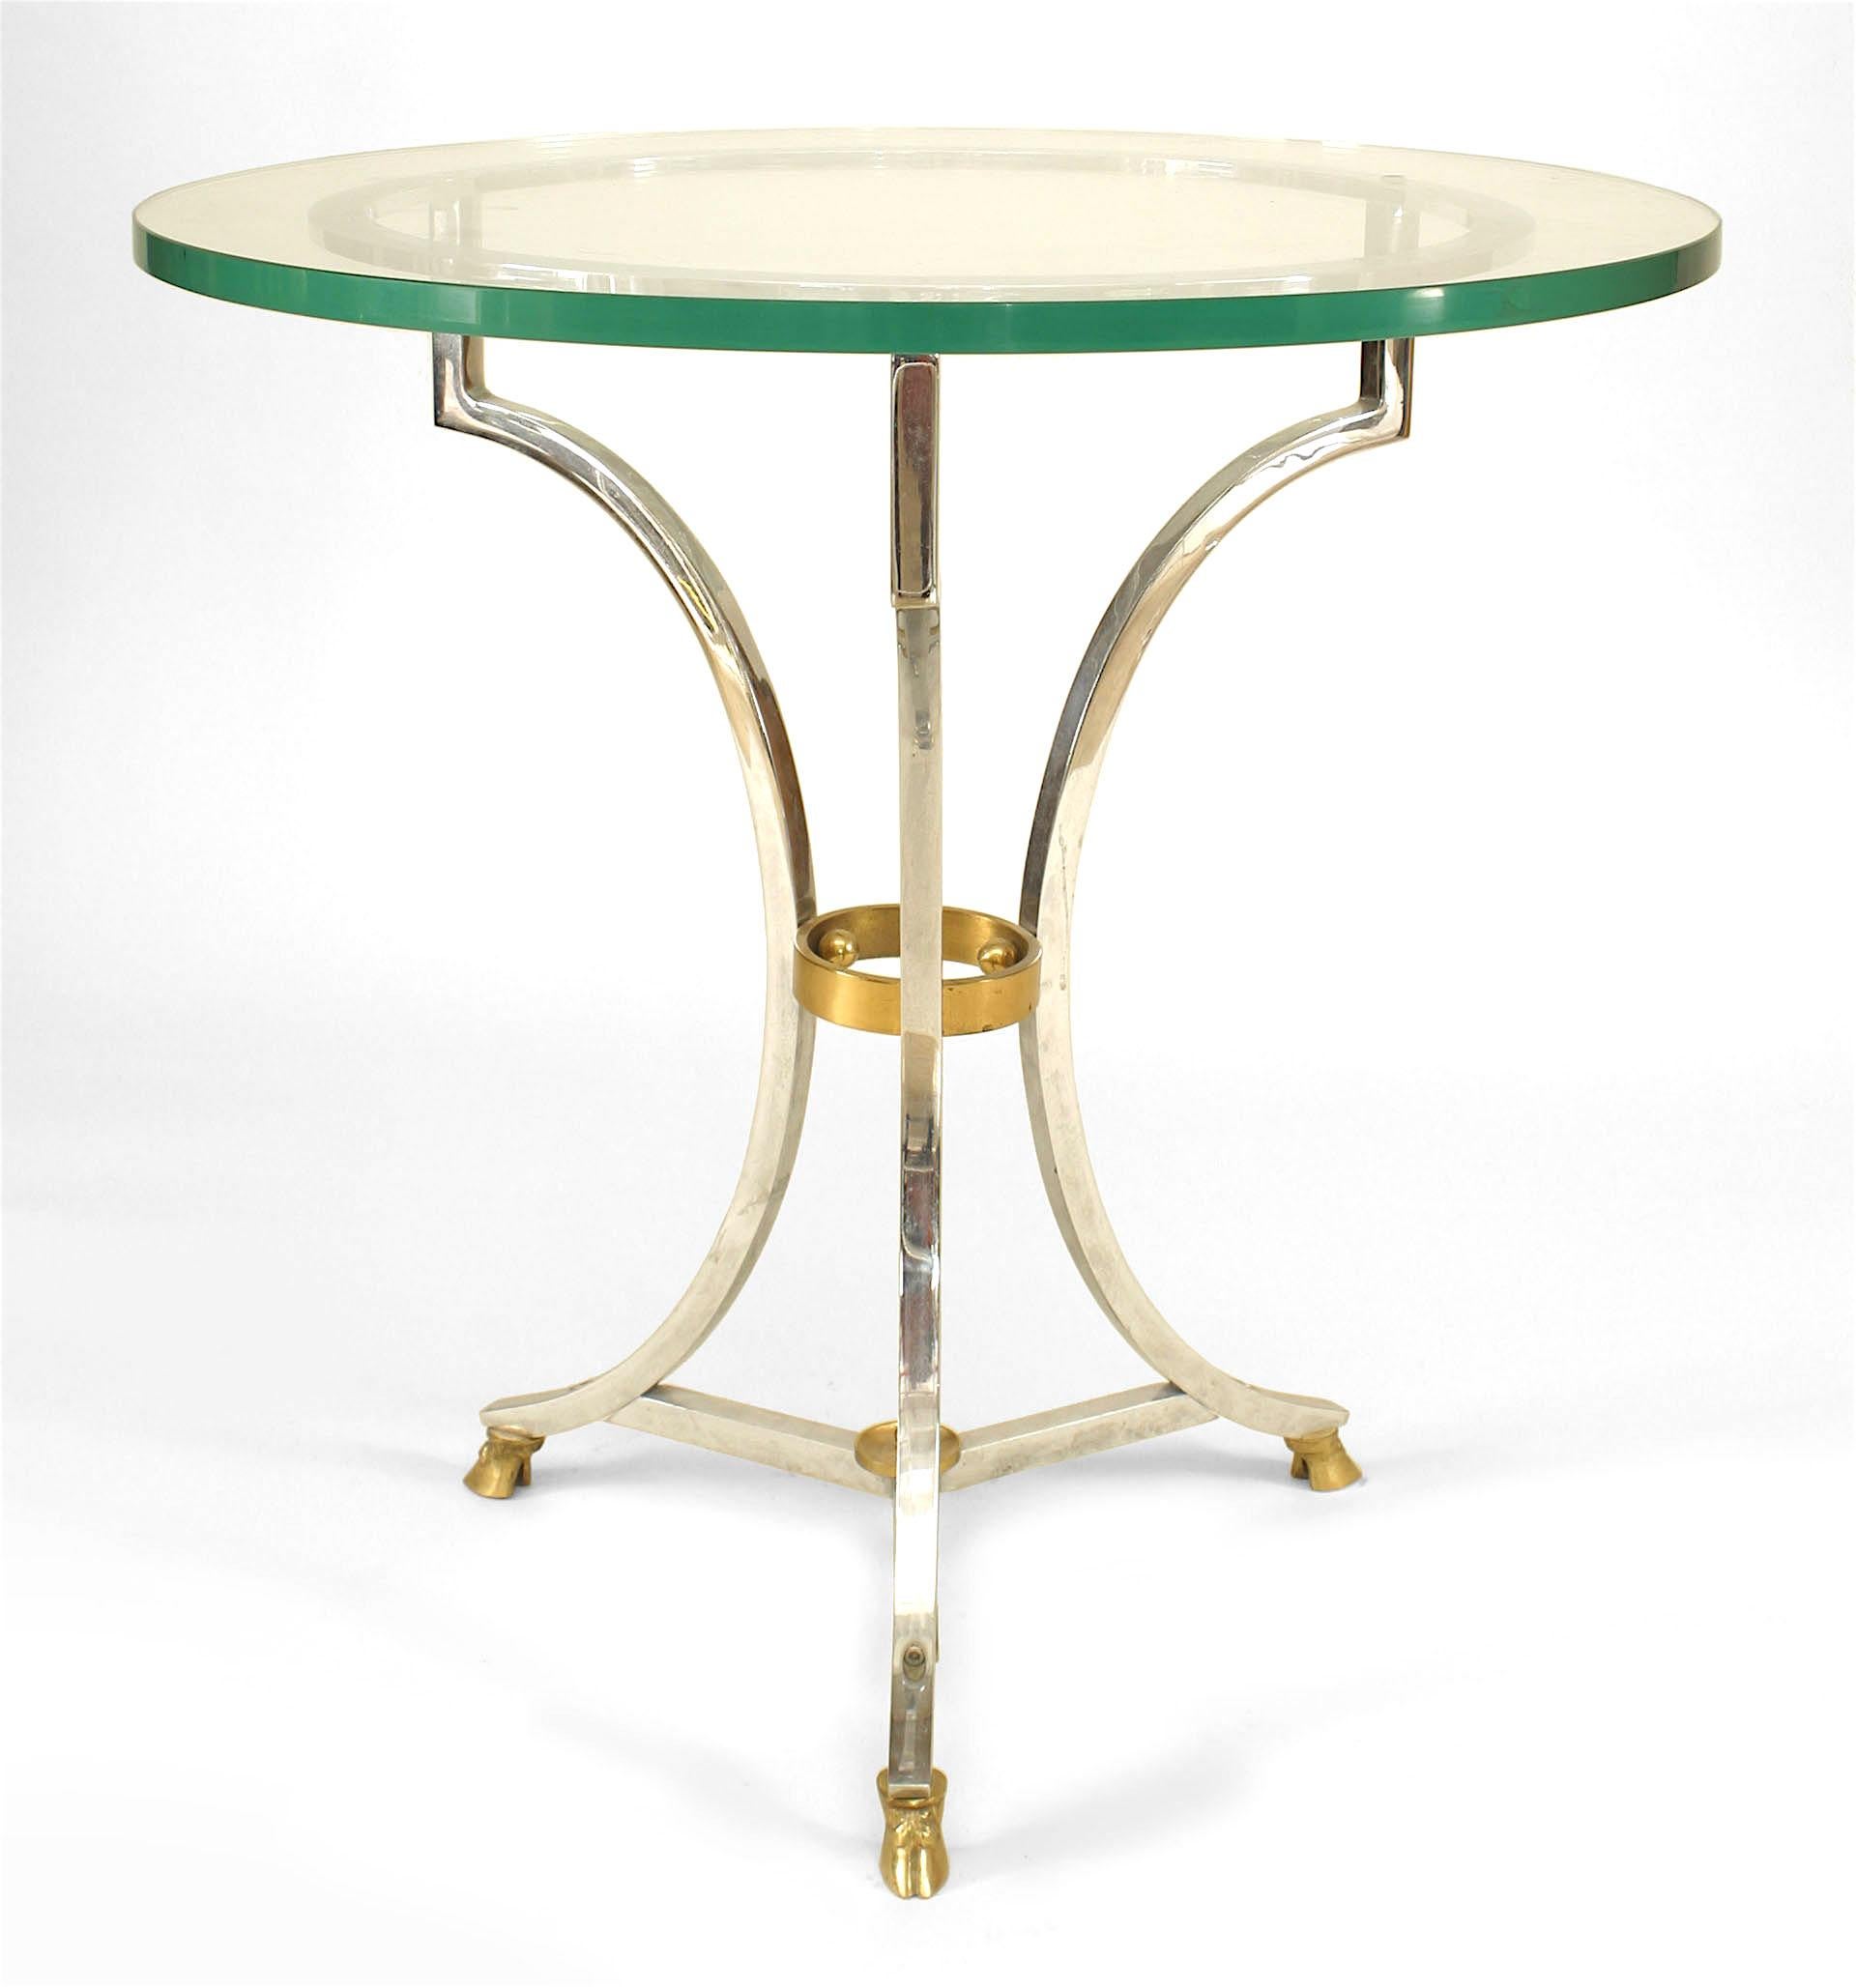 French end table with round glass top supported by a nickel plated base adorned with a brass ring and three brass hoof feet joined by a small ring stretcher.